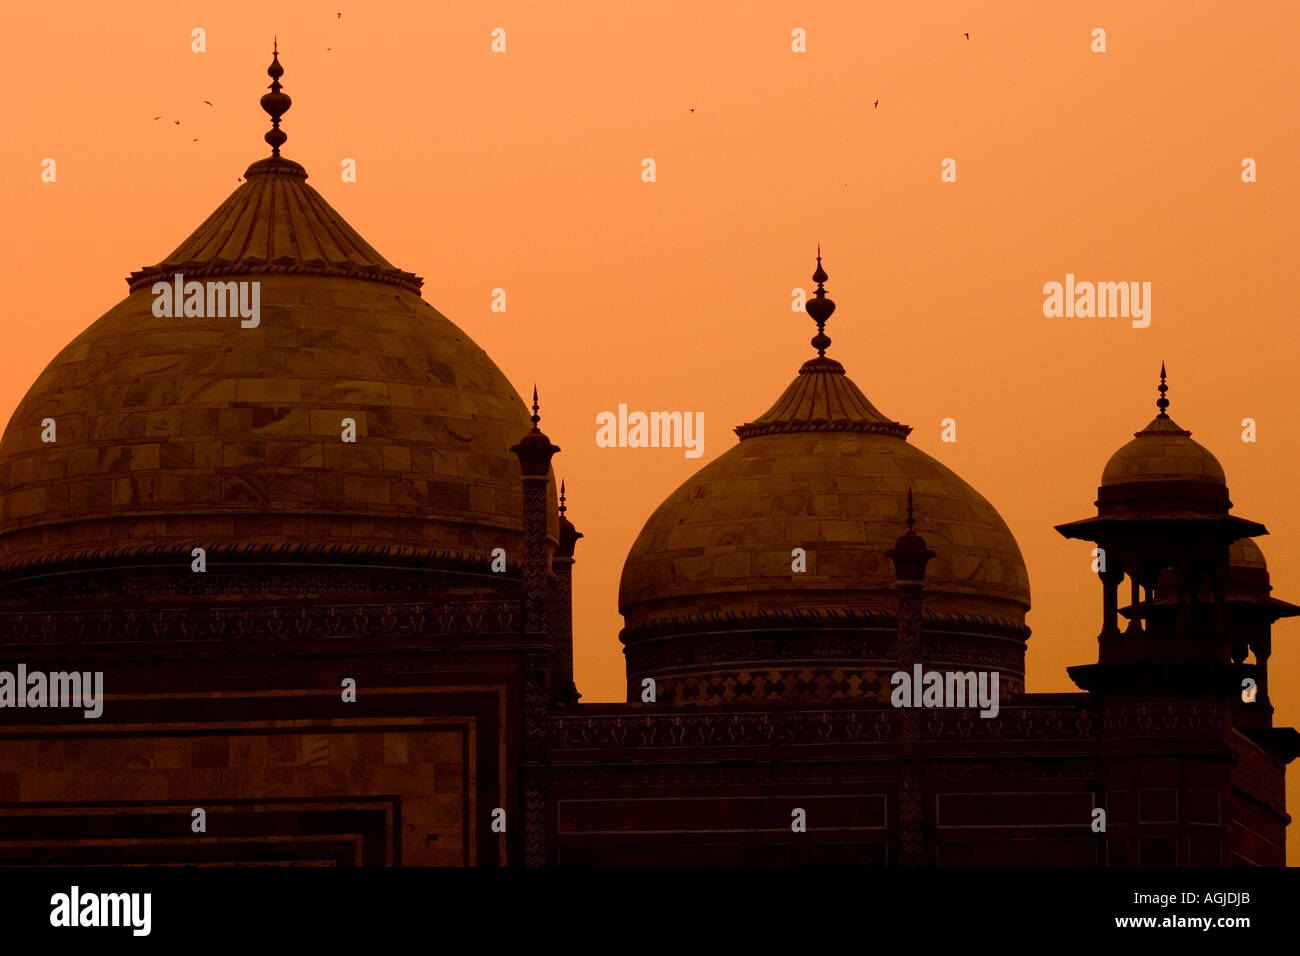 asia india details of the taj mahal mosques during sunset Stock Photo